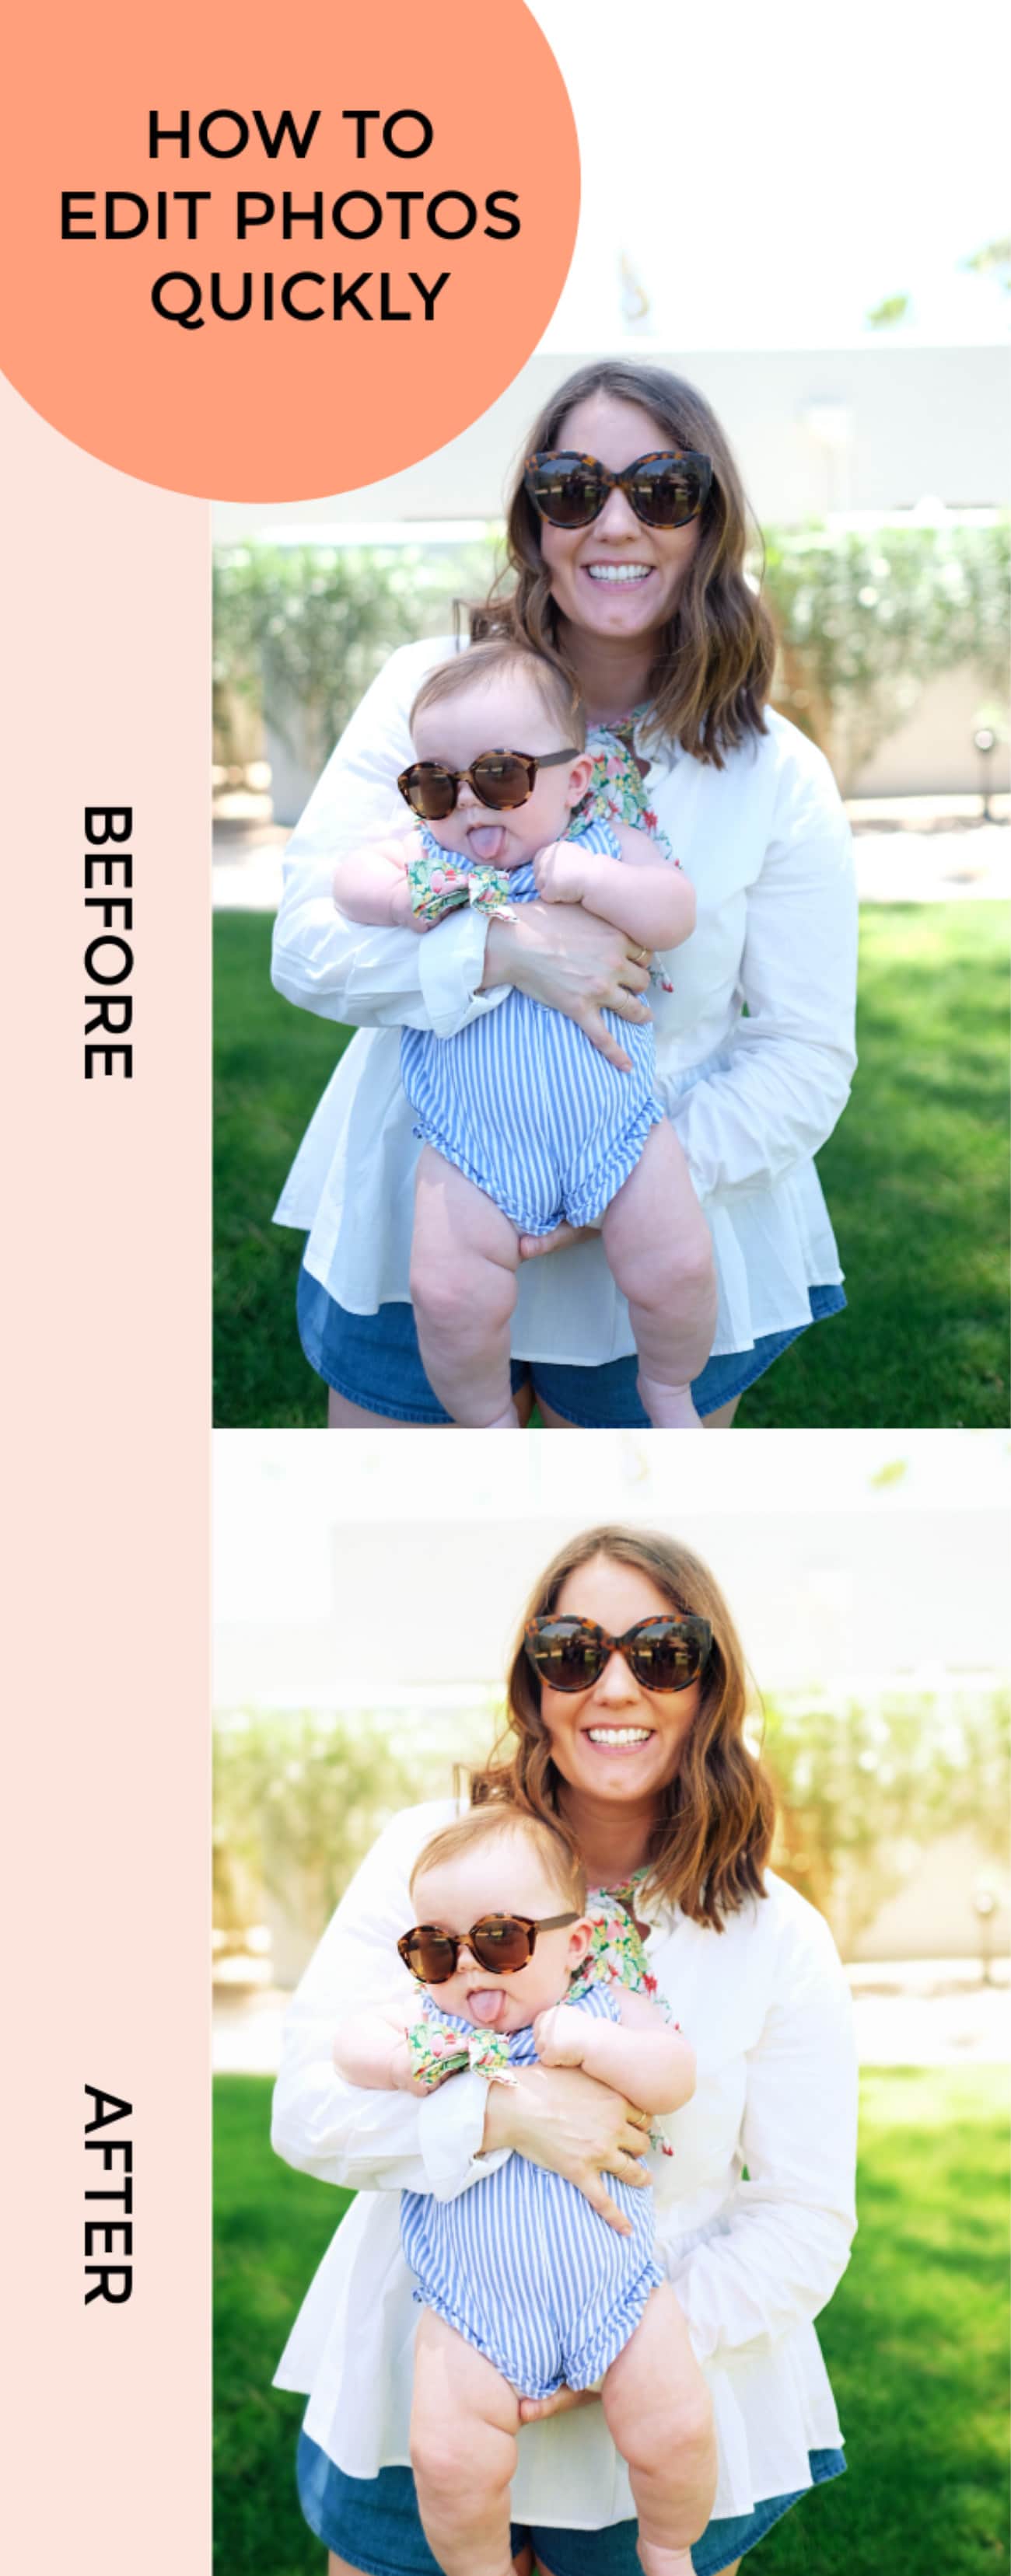 How I Edit Photos For Instagram Quickly by top Houston lifestyle blogger Ashley Rose of Sugar & Cloth #photography #editing #instagram #socialmedia